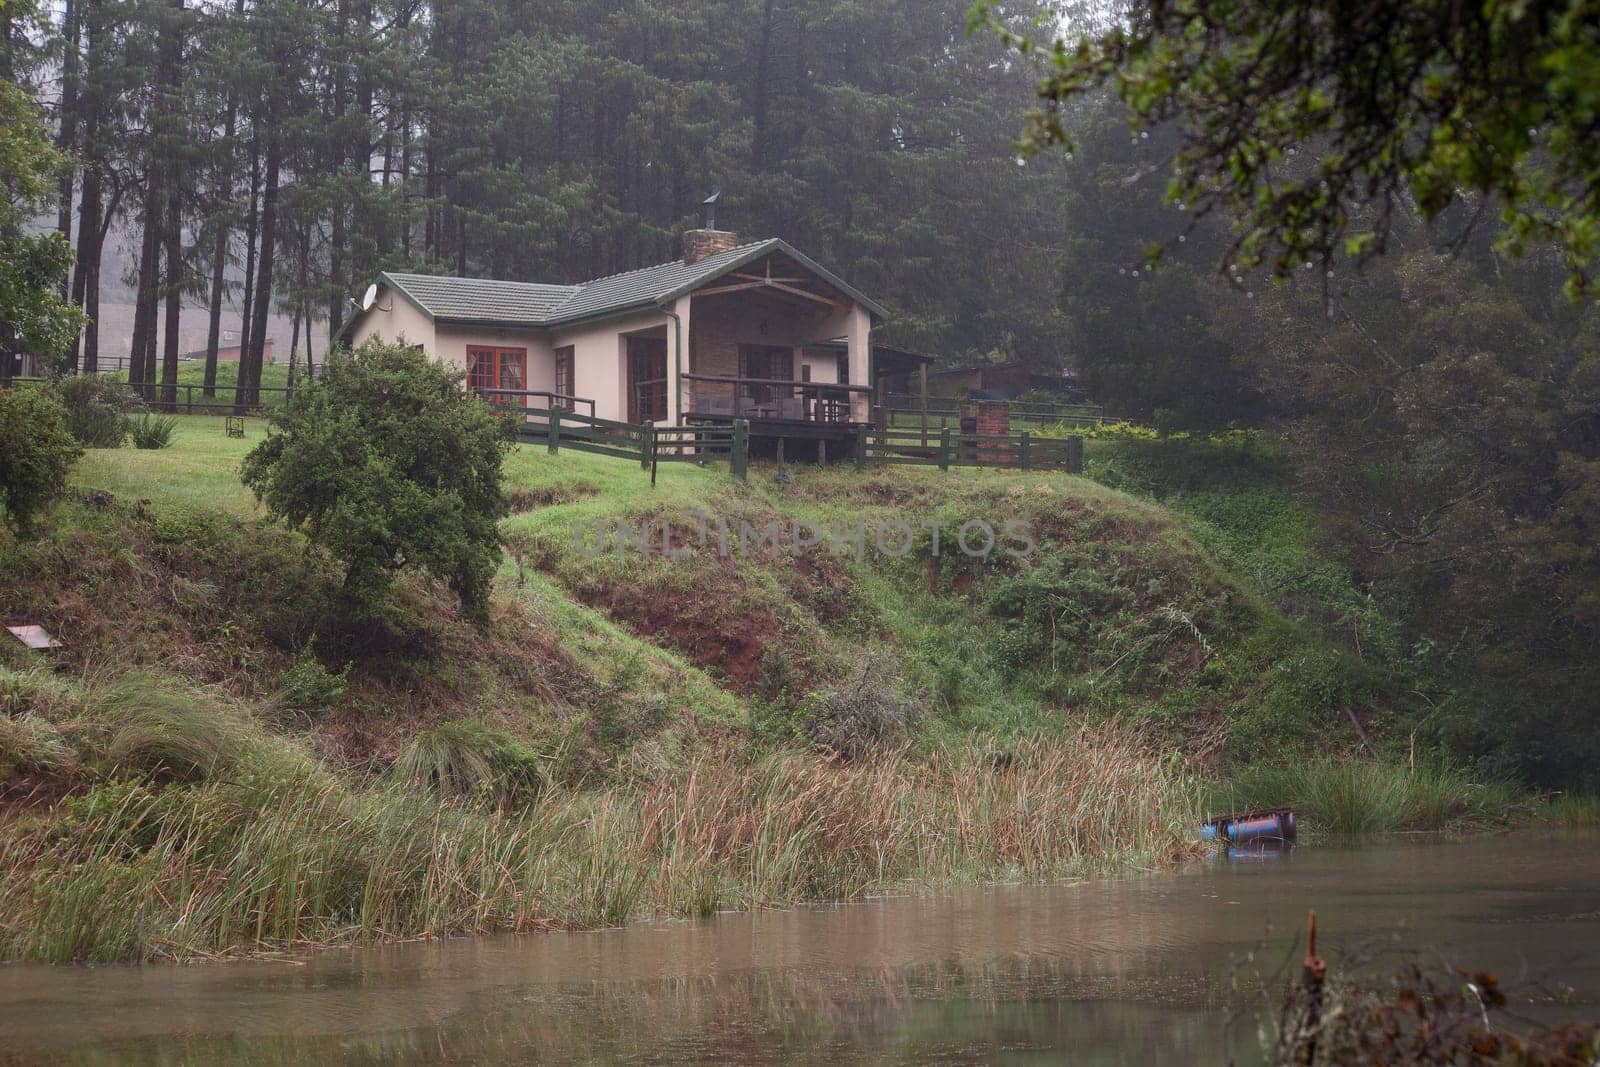 Fishing cabin next to a trout dam near Haenertsburg South Africa